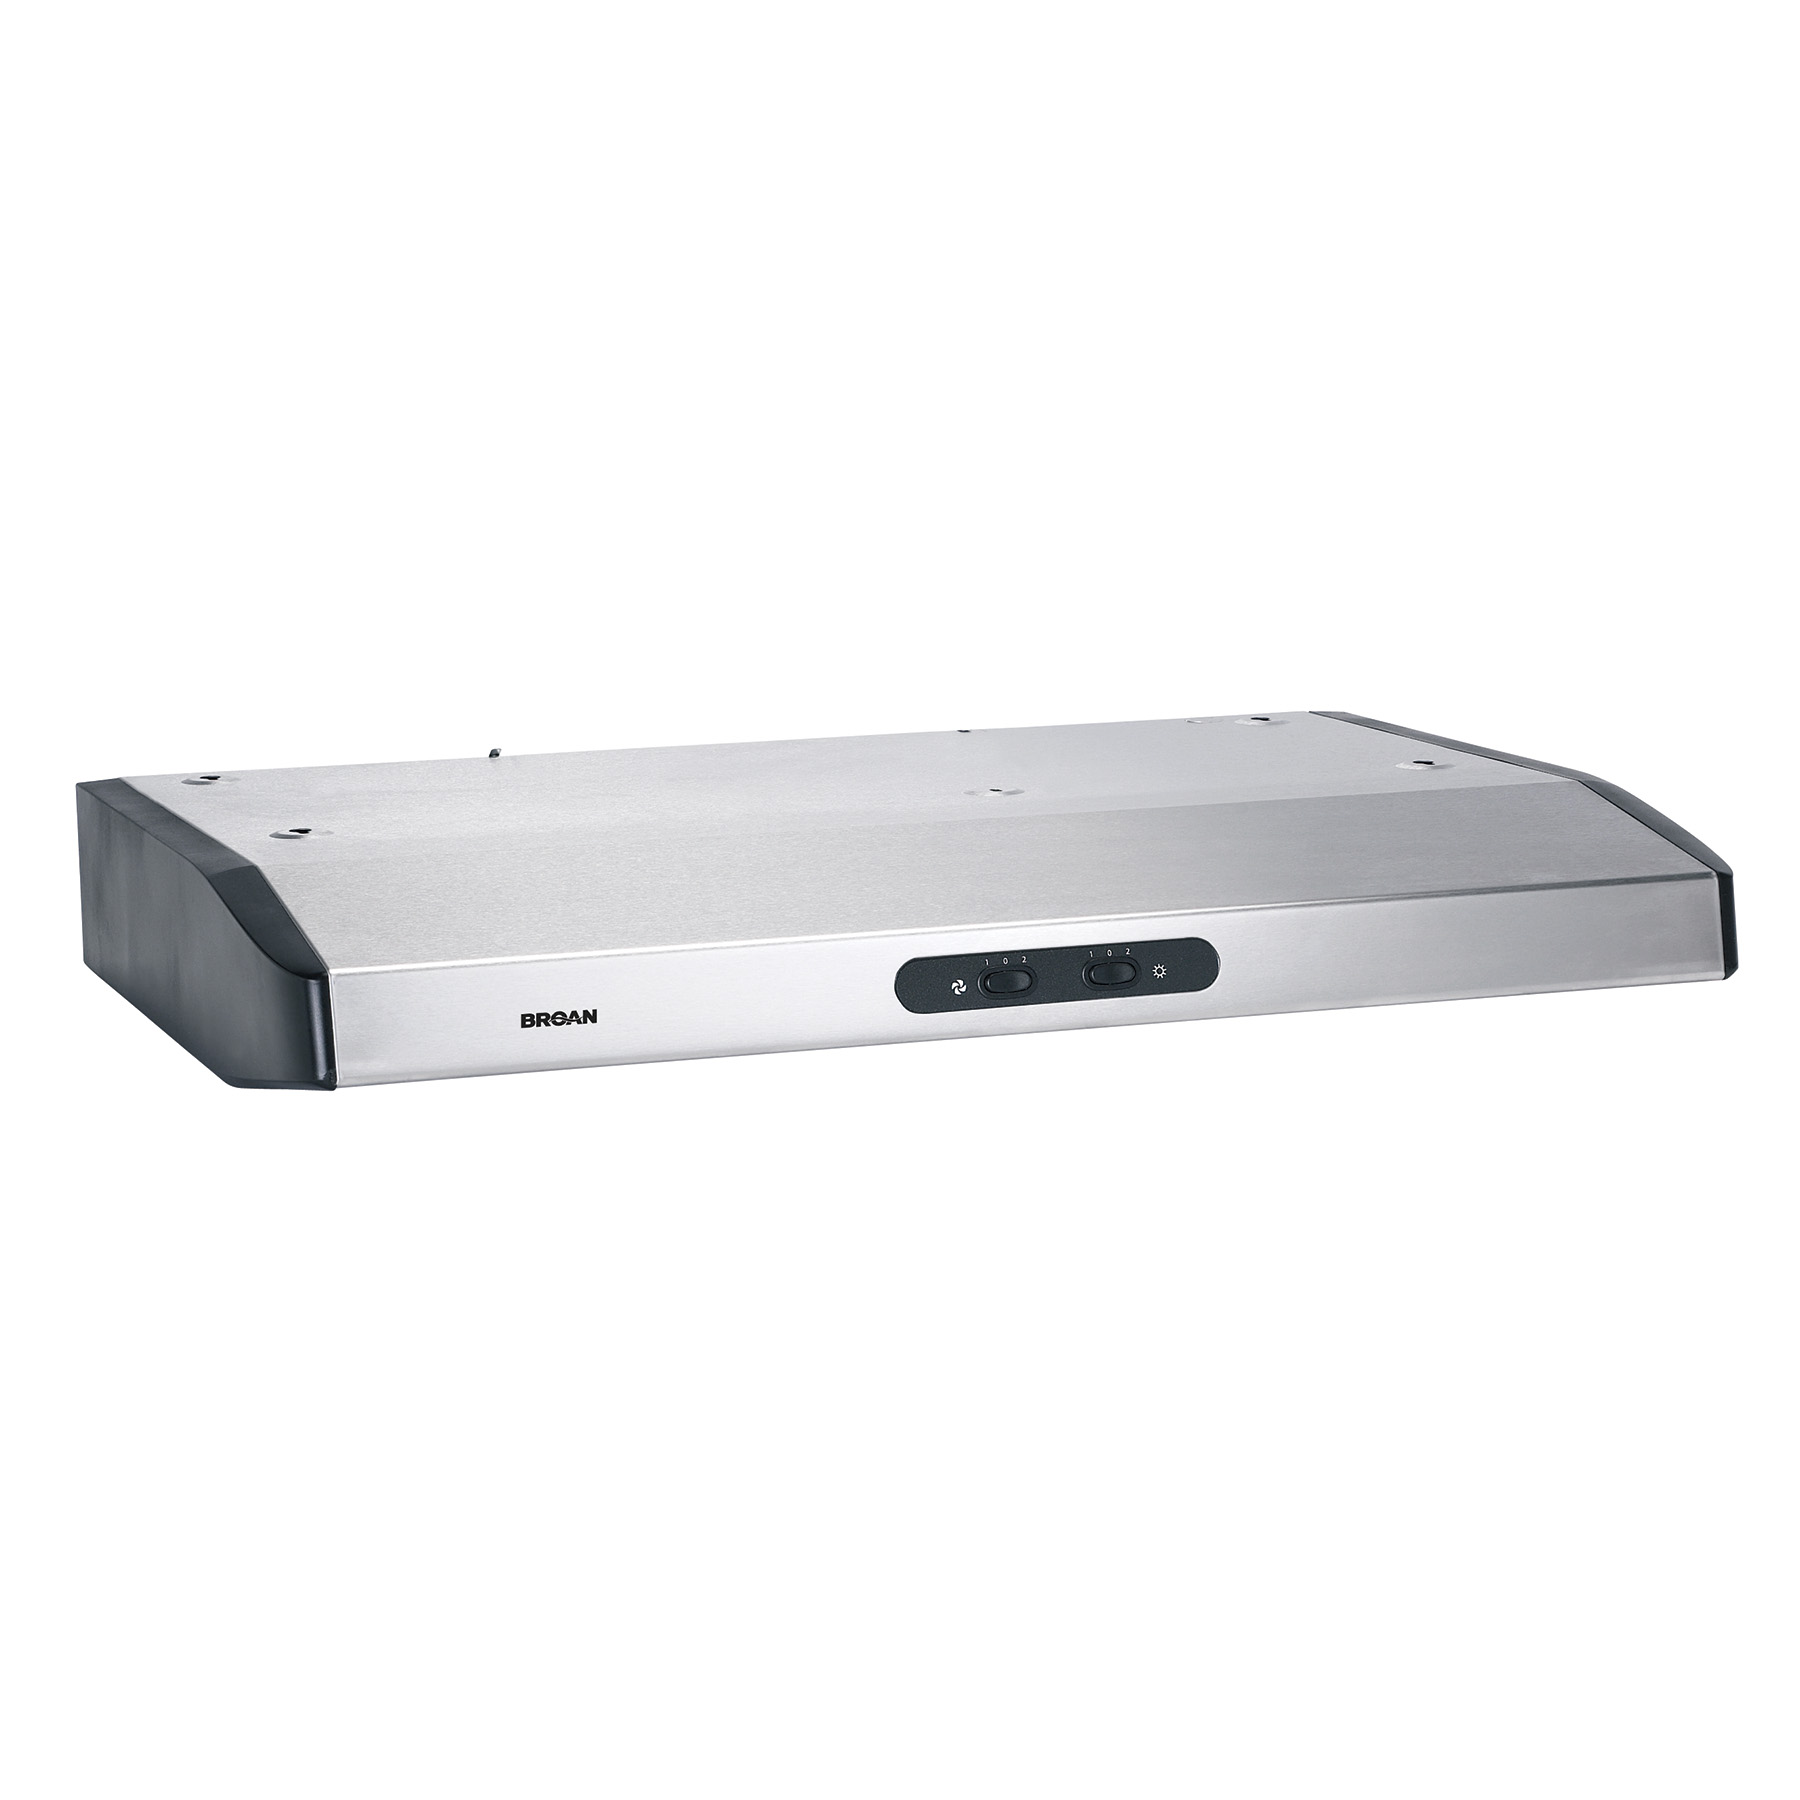 Broan QDE30SS 30 Inch Under Cabinet Range Hood with 2-Speed/280 CFM Blower,  Rocker Switch Control, Dual Fluorescent Lights, Versatile Design, Energy  Star Rated, UL Listed, and HVI-2100 Certified: Stainless Steel